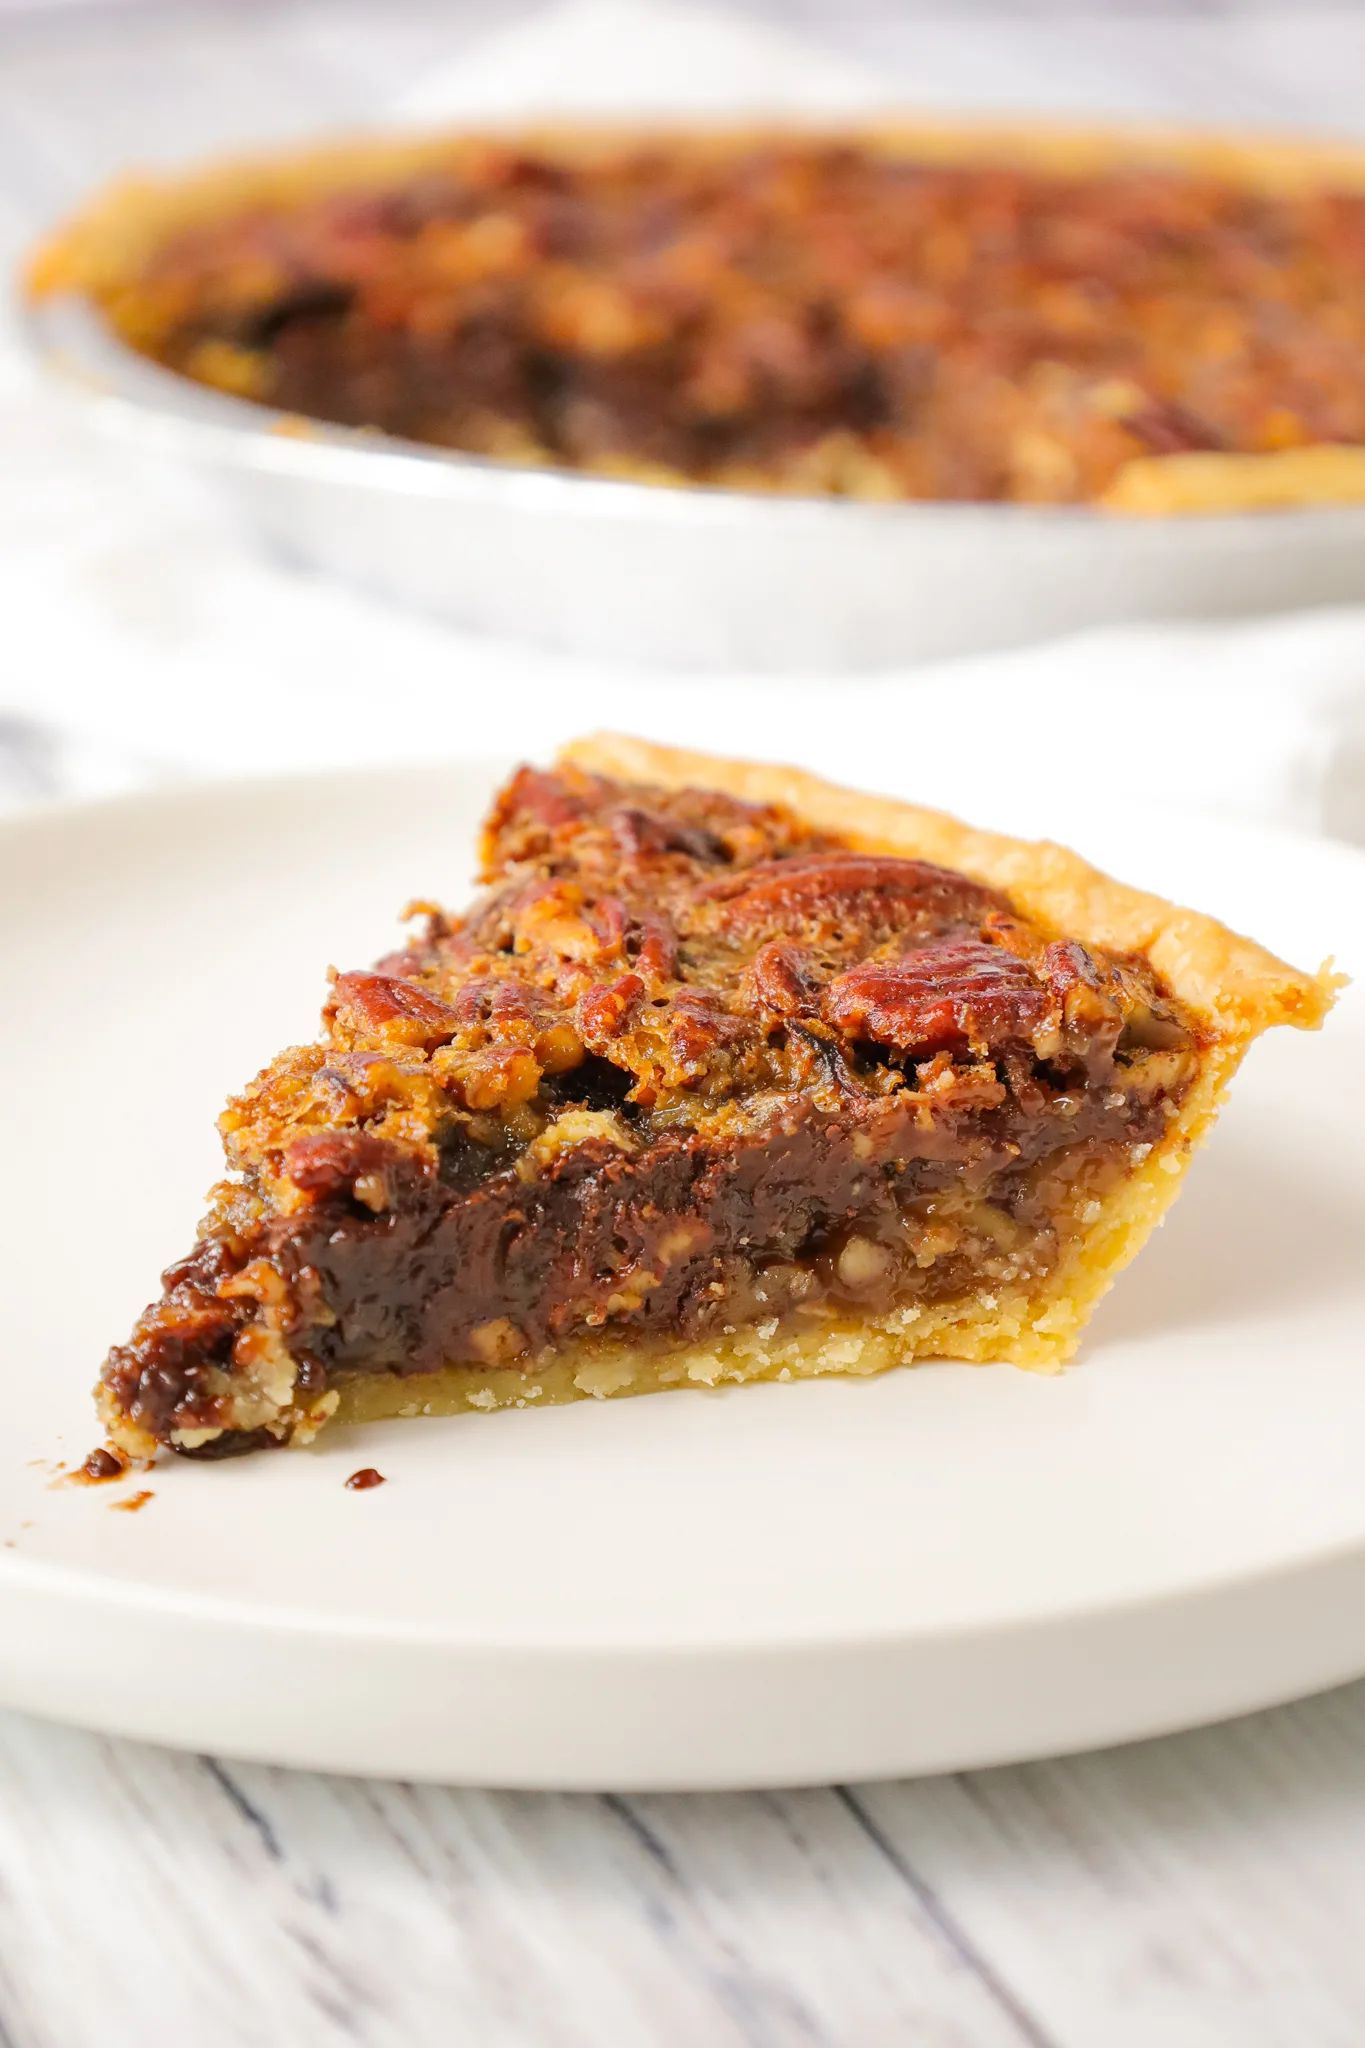 Chocolate Chip Pecan Pie is a decadent chocolate and caramel pie loaded with pecans.